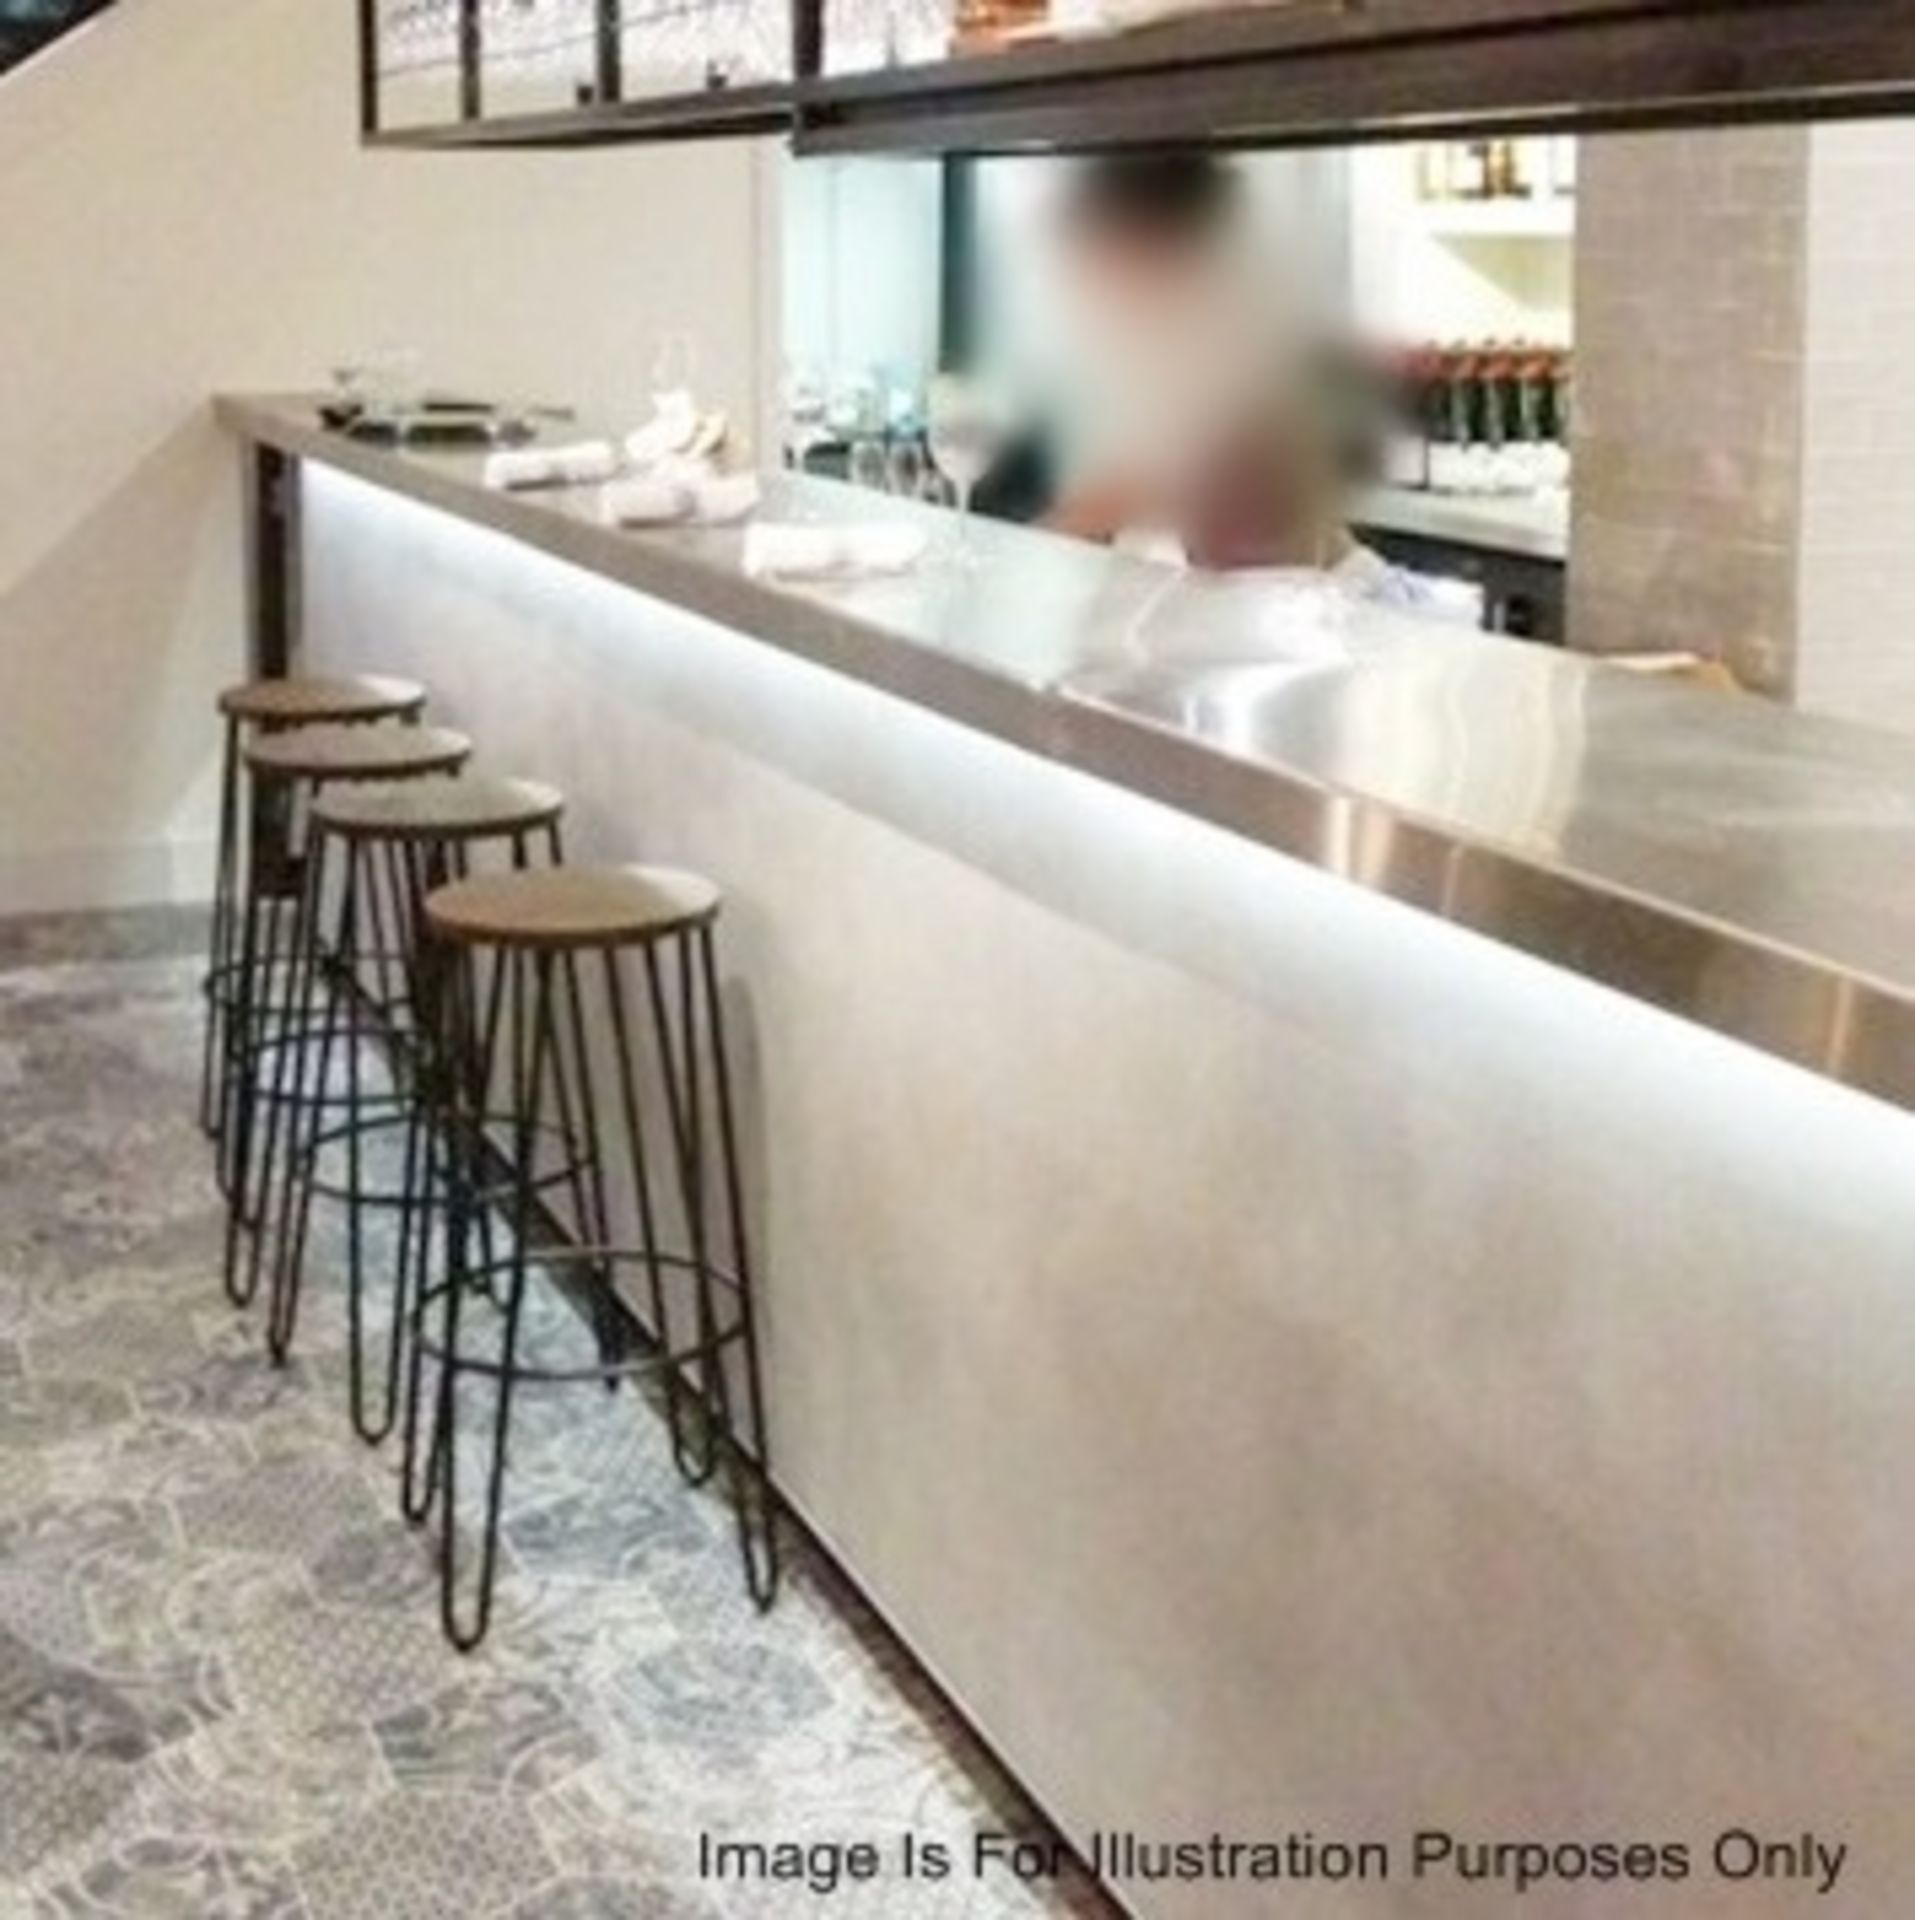 1 x Restaurant Serving Counter Featuring Stainless Steel Top And Hatches At Both Ends - Originally I - Image 2 of 11